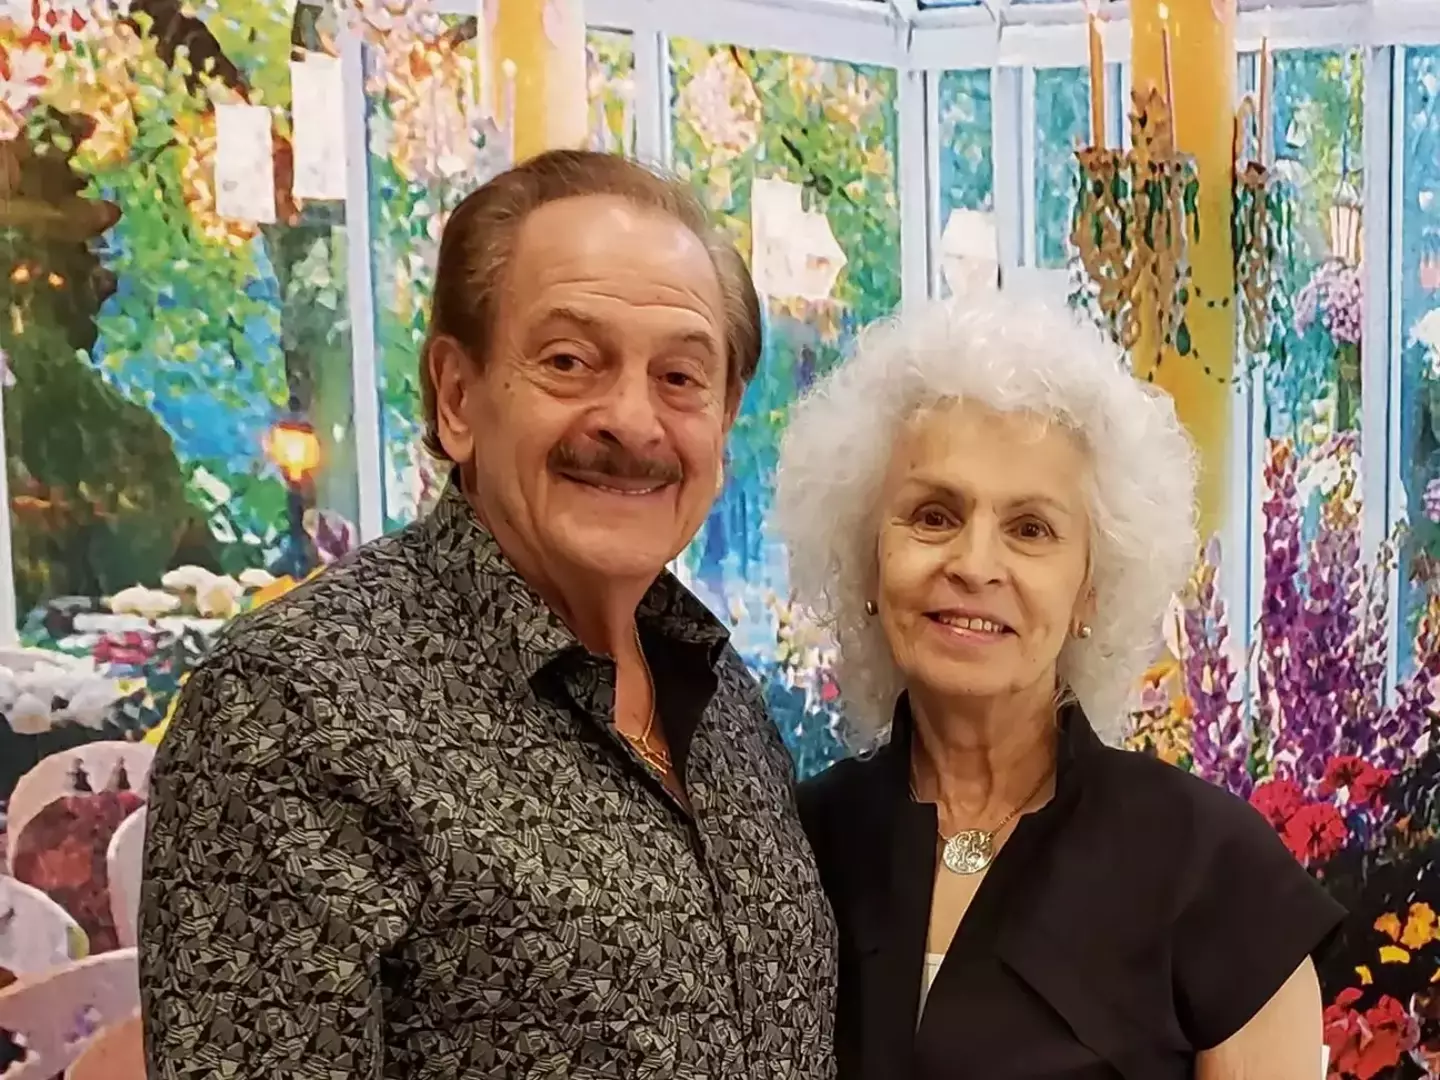 Mike and Barbara Soroker have spent $2.5 million on buying a cabin on a cruise liner to live out their retirement.